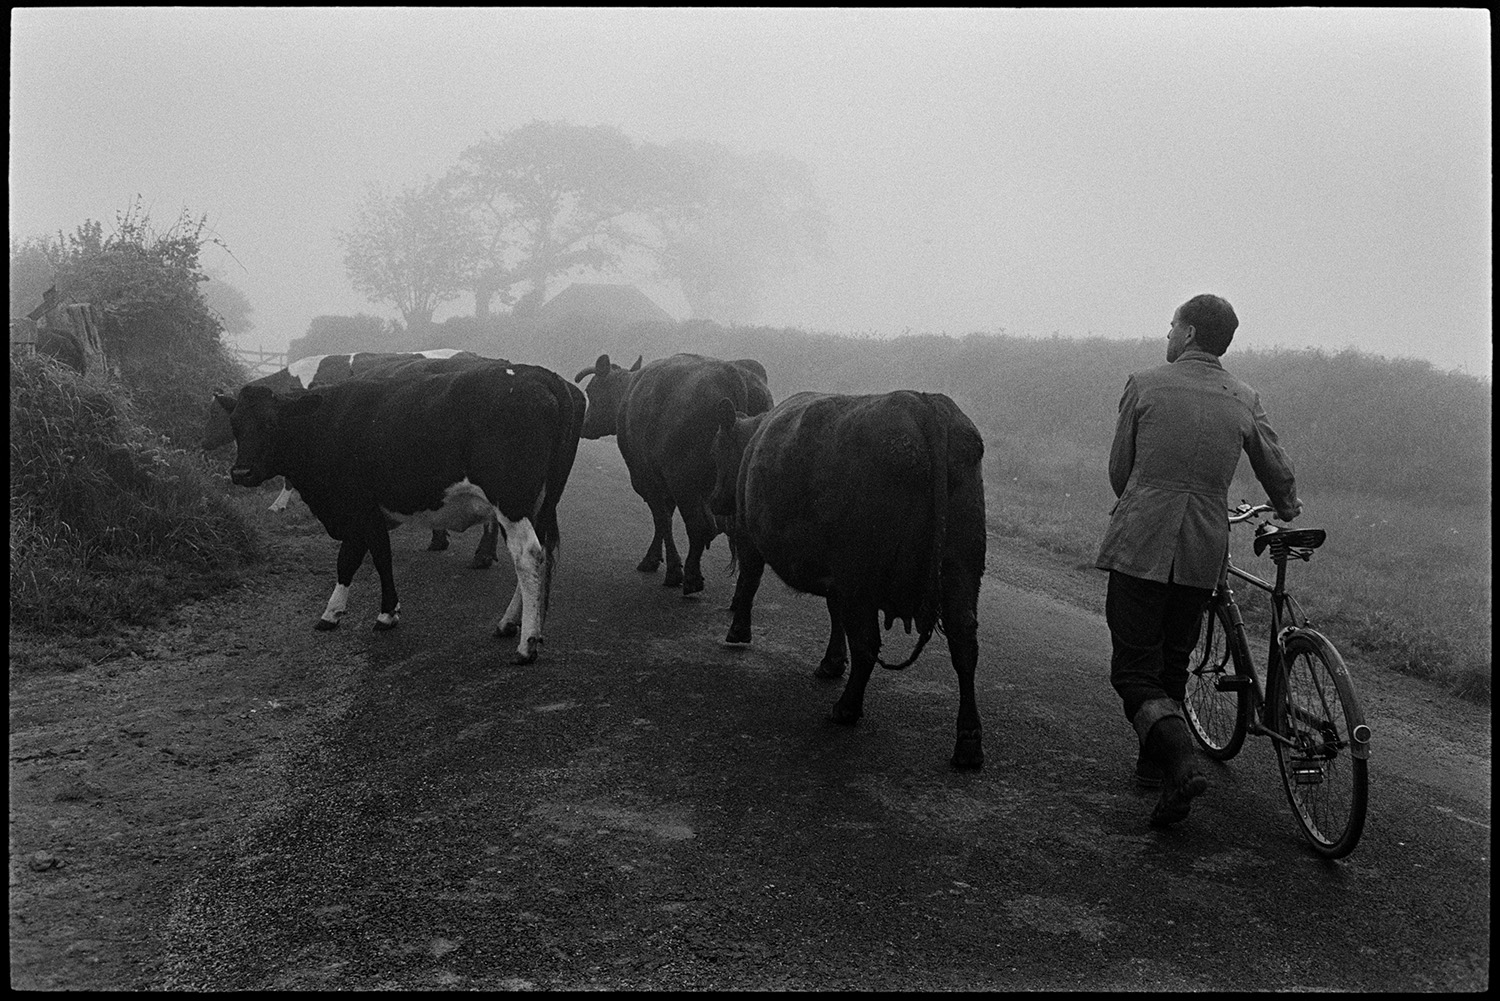 Farmer taking cows through village after milking, past cars in mist with bicycle. 
[Walter Newcombe herding cows along a misty road in Sheepwash after milking them. He is also pushing a bicycle.]